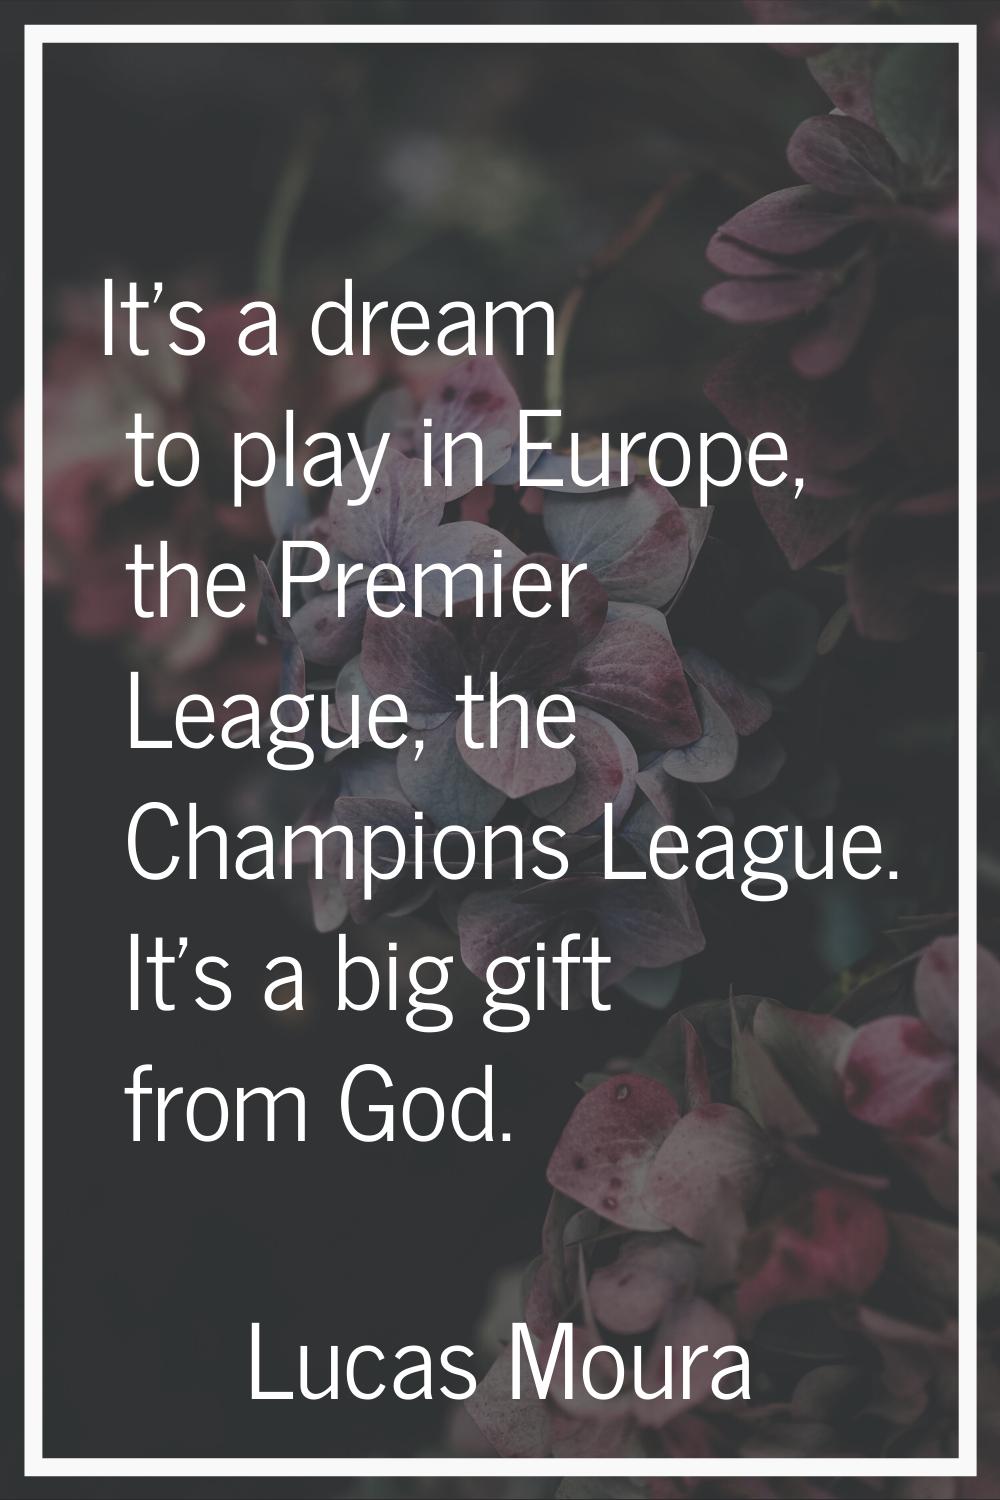 It's a dream to play in Europe, the Premier League, the Champions League. It's a big gift from God.